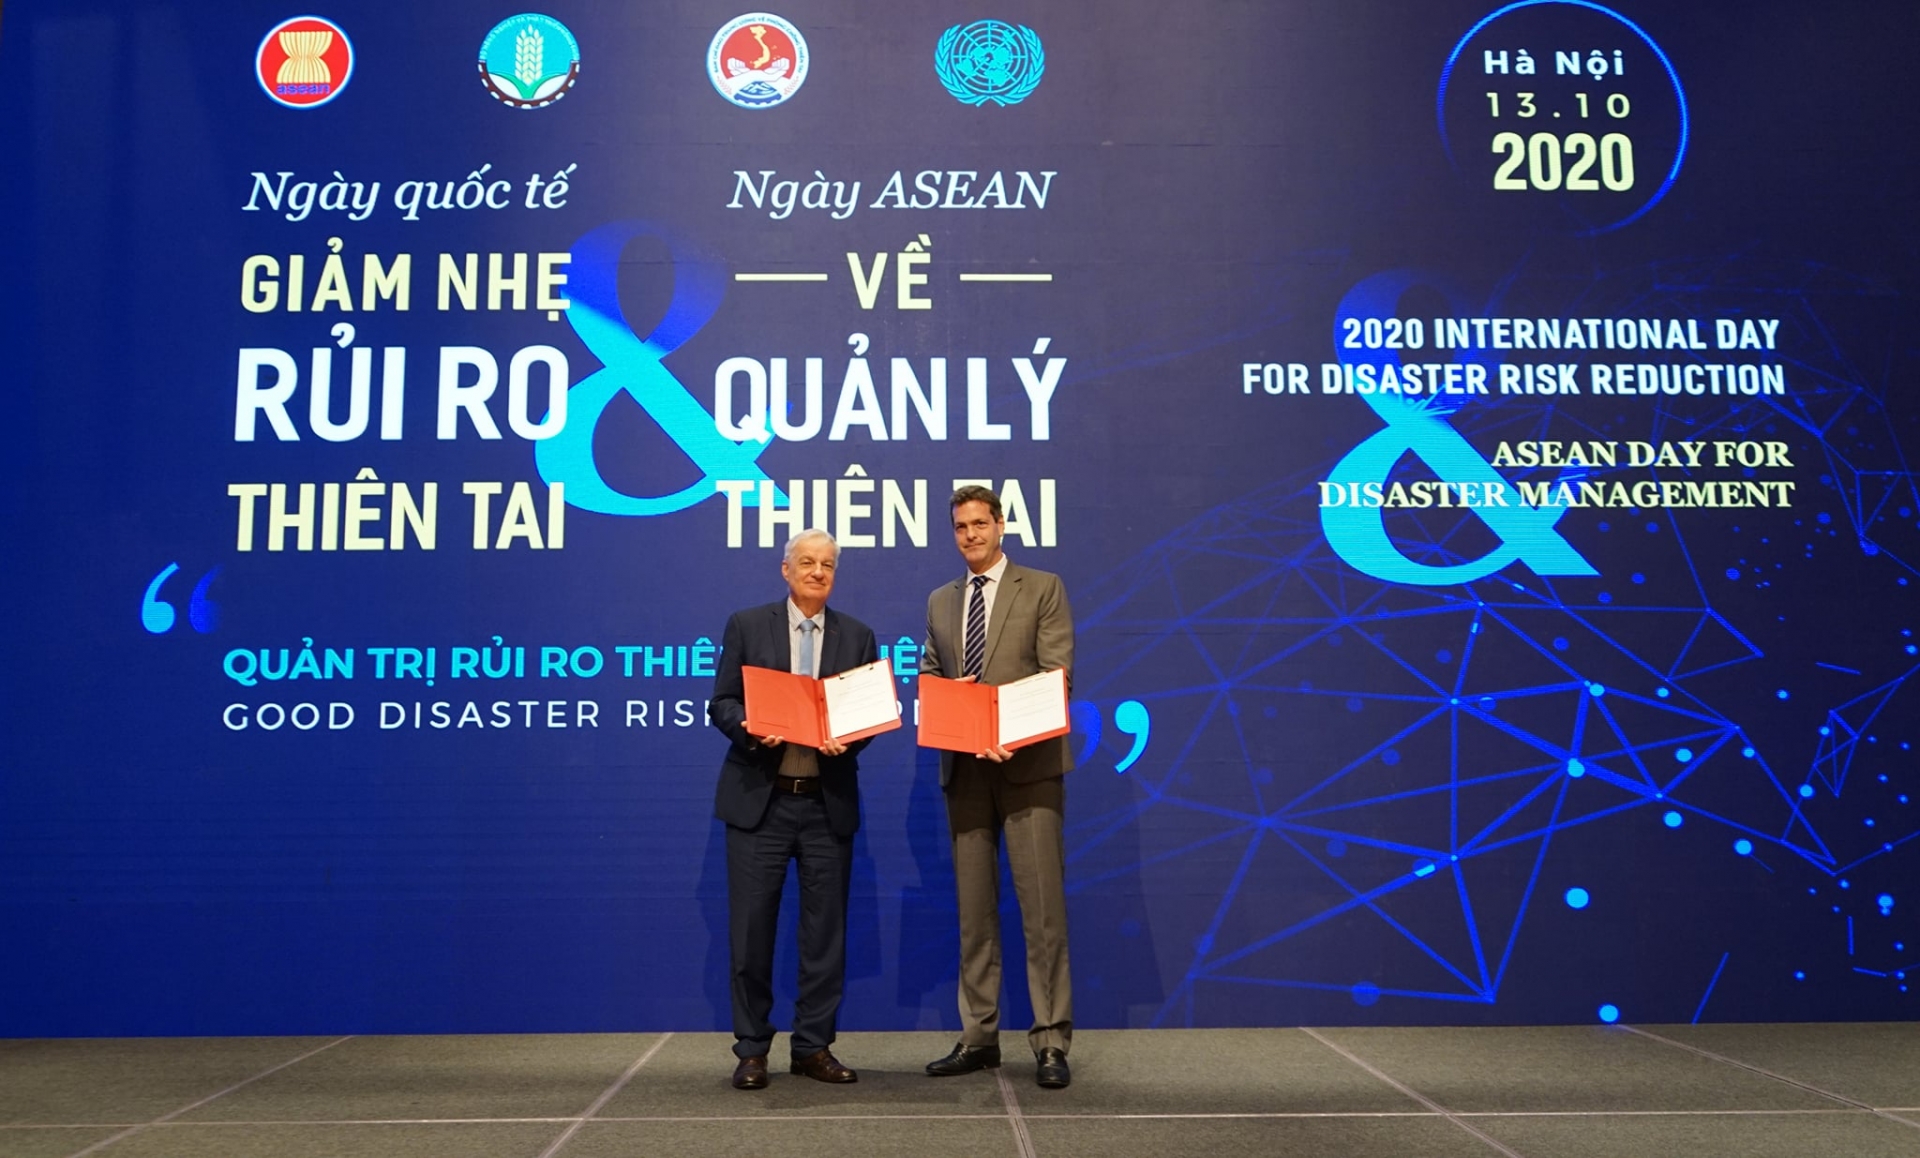 German cooperation joins disaster risk reduction partnership in vietnam